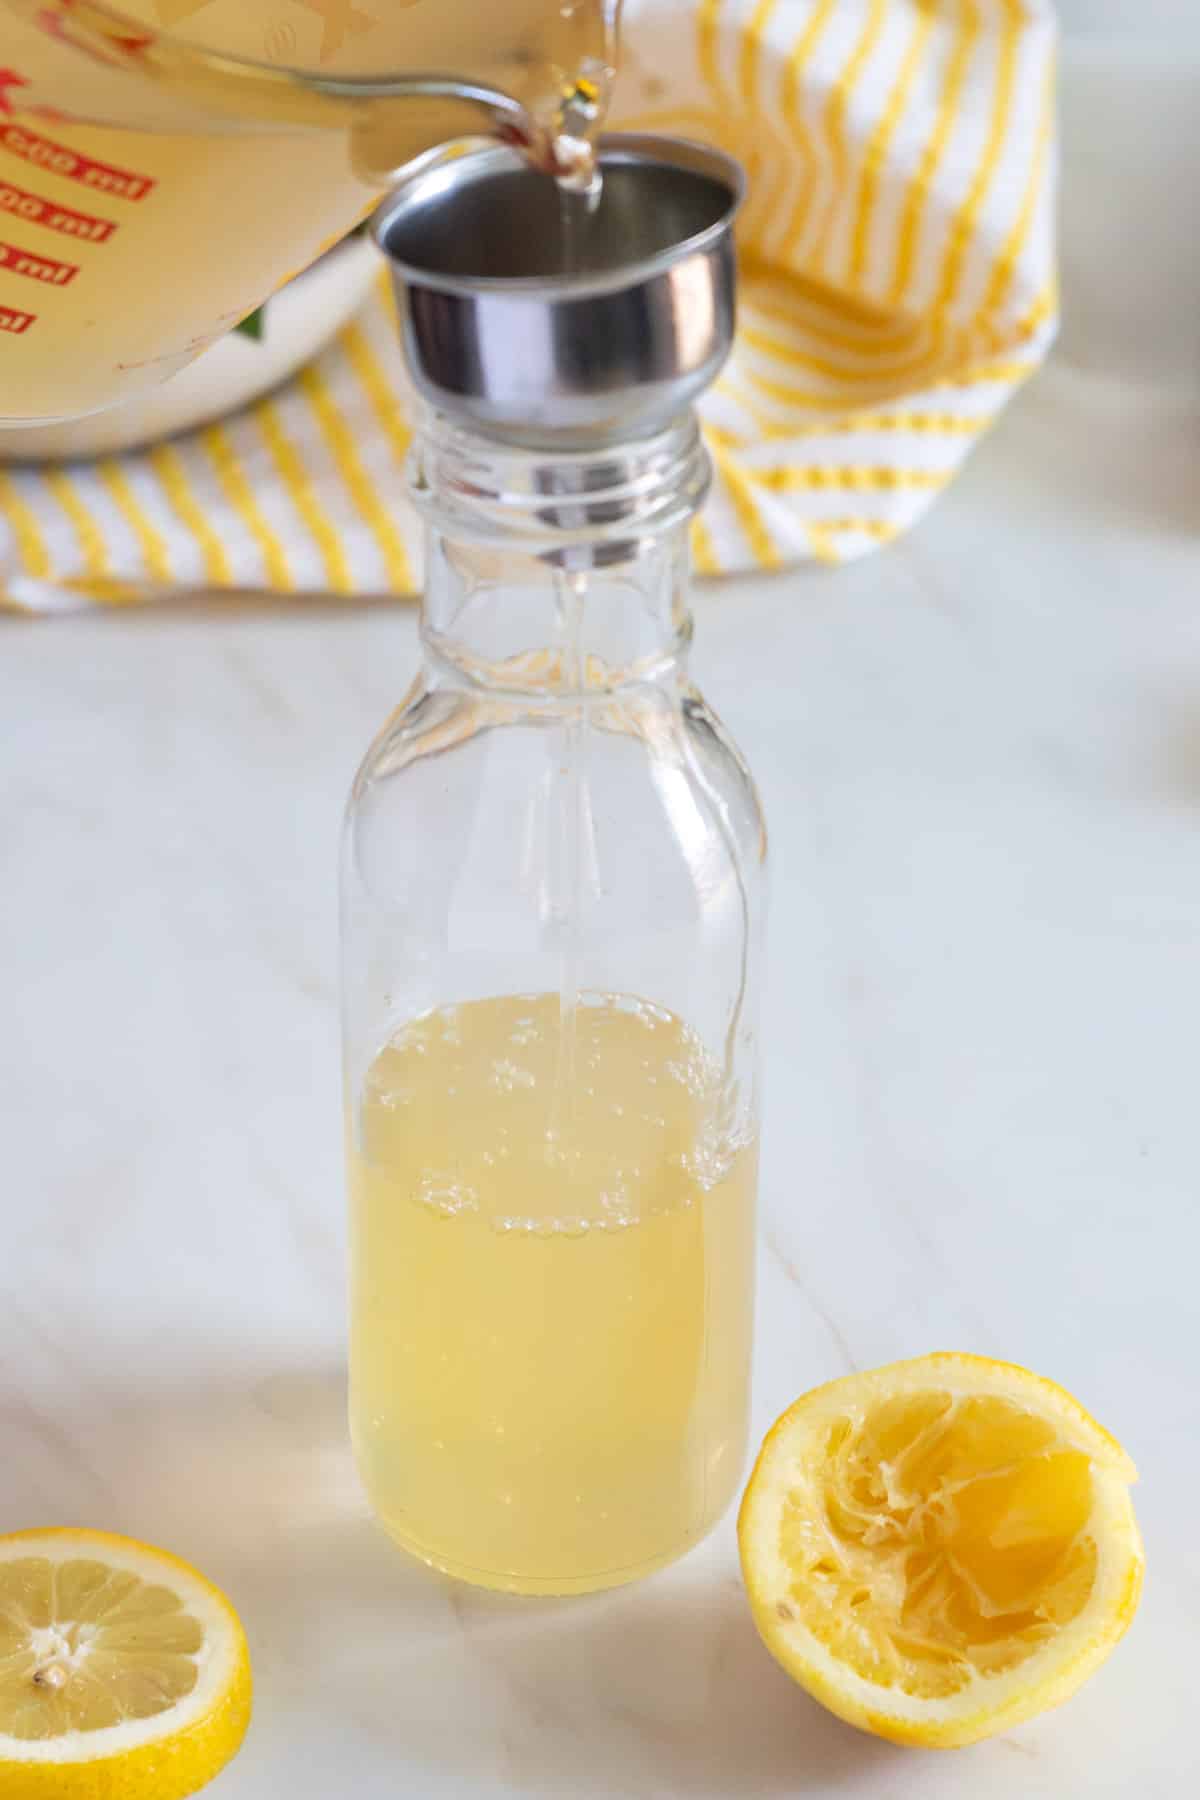 Pouring simple syrup into a bottle with cut lemons on a counter.